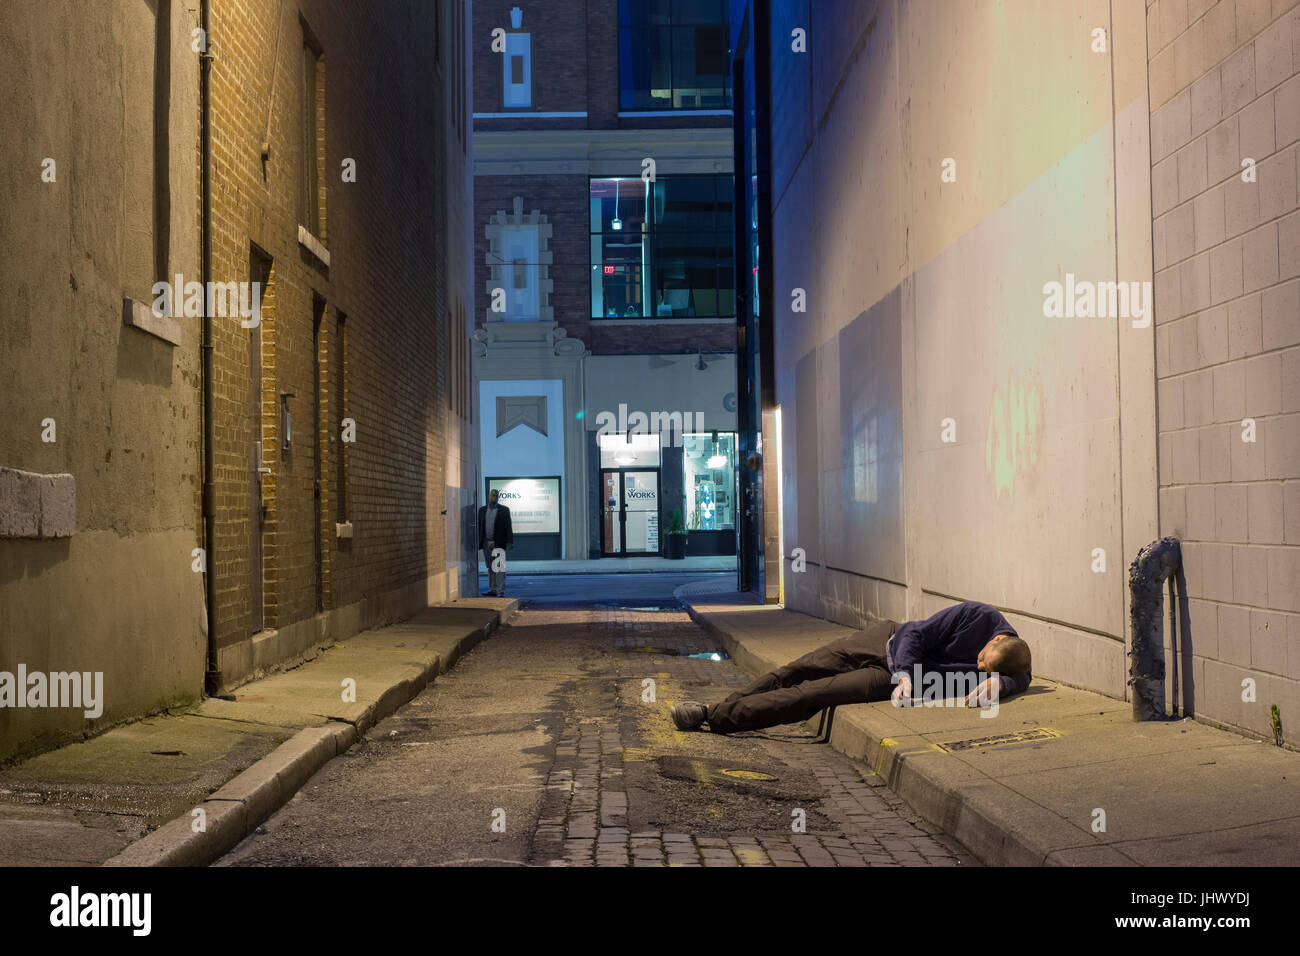 Man in a dark alley appears to be drunk, lost or needs help. Stock Photo